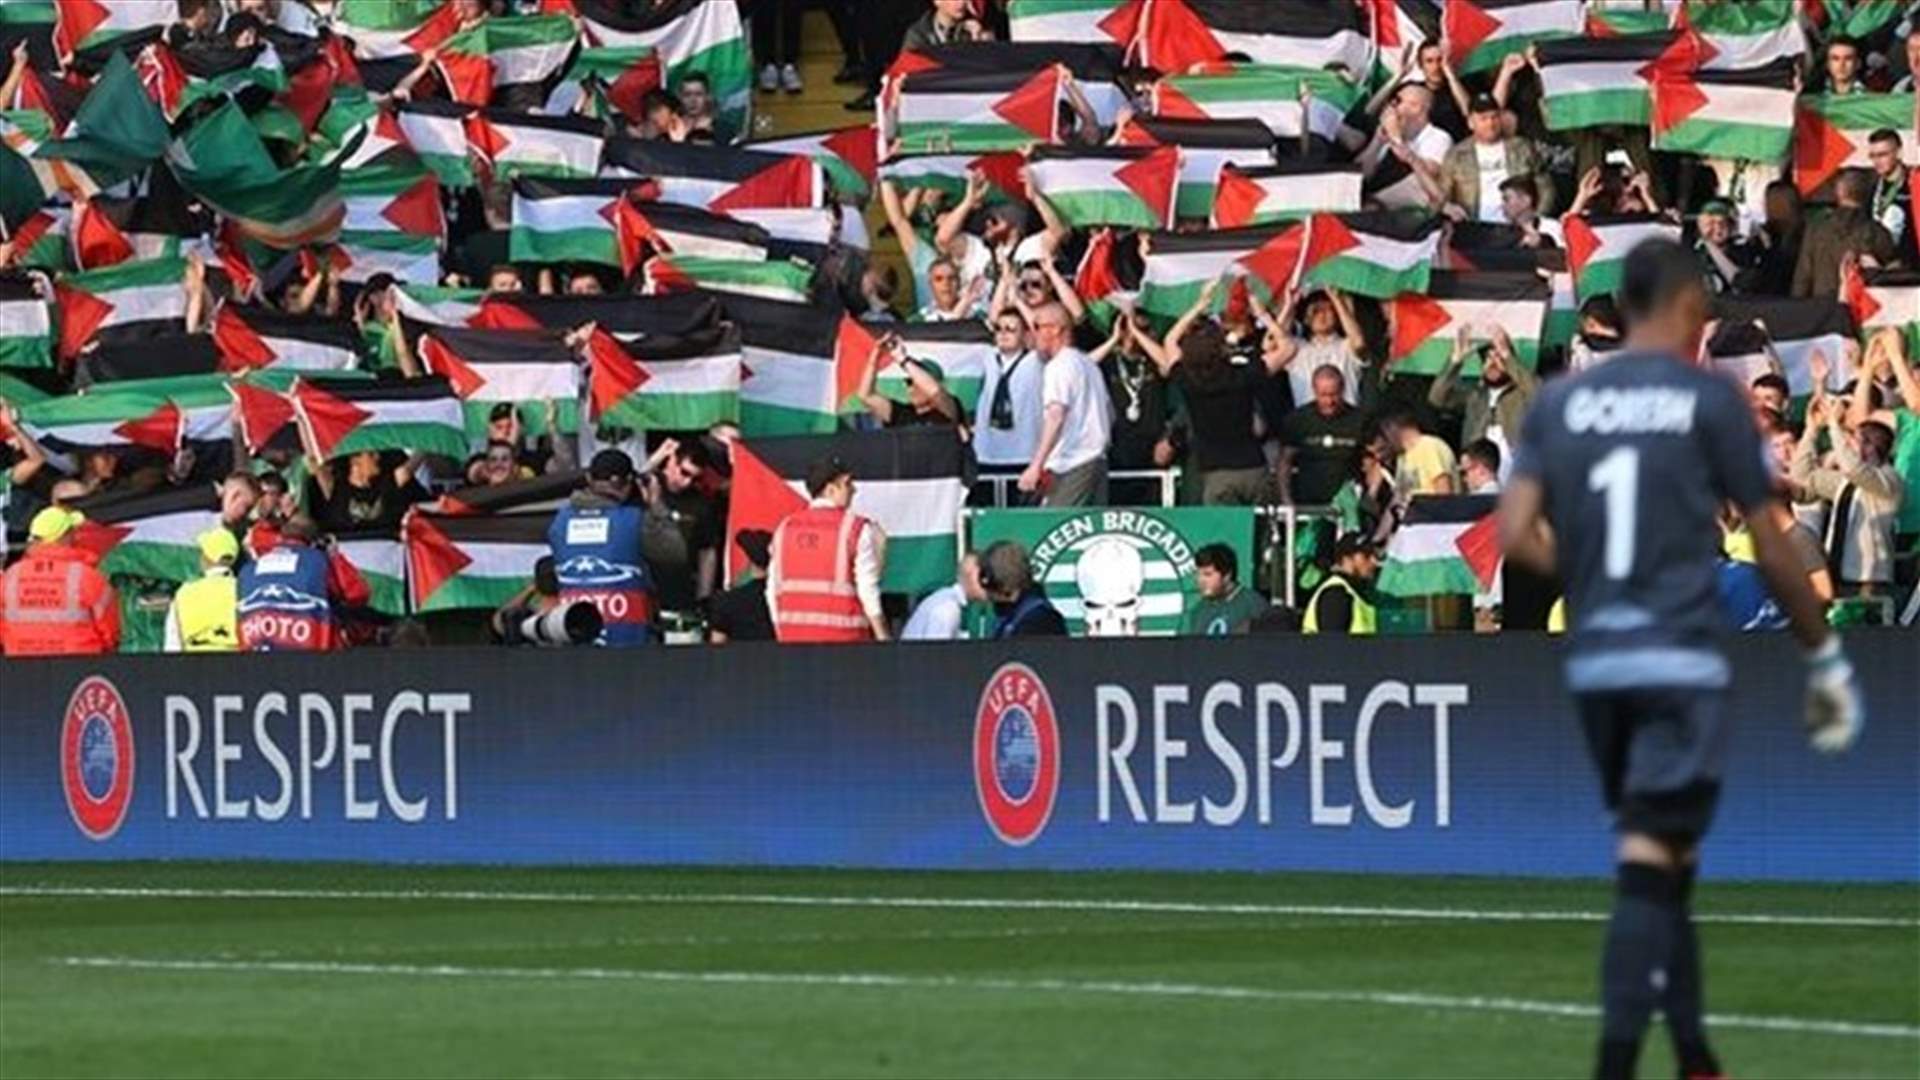 REPORT: Scottish football fans raise Palestinian flags in match against Israeli team 